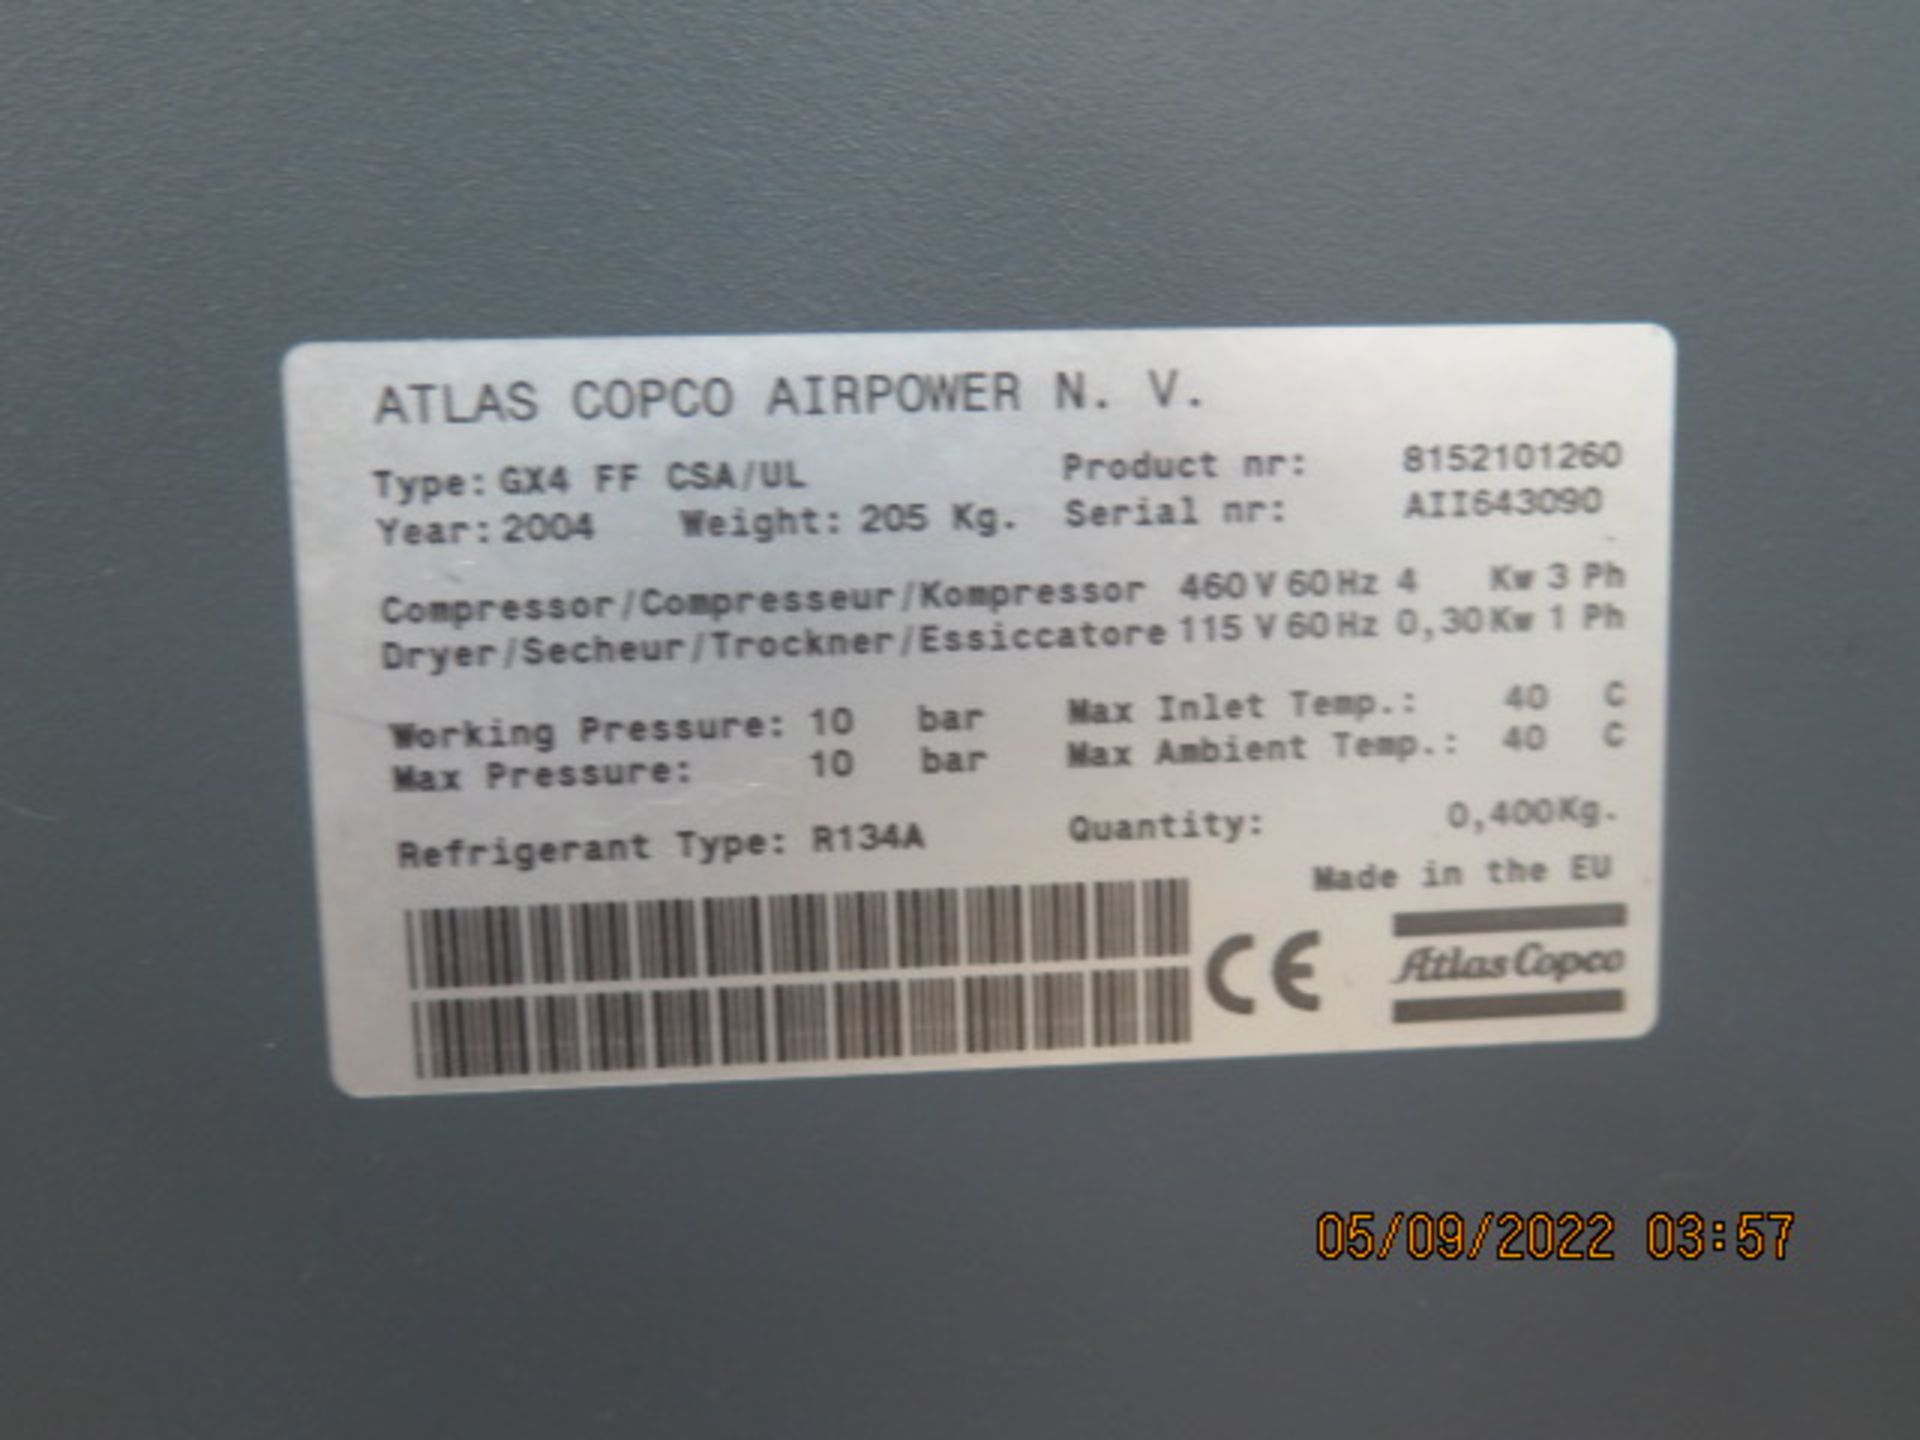 2004 Atlas Copco GX4 FF CSA/UL 5Hp Rotary Air Comp s/n AII643096 w/ Built-In Air Dryer, SOLD AS IS - Image 9 of 9